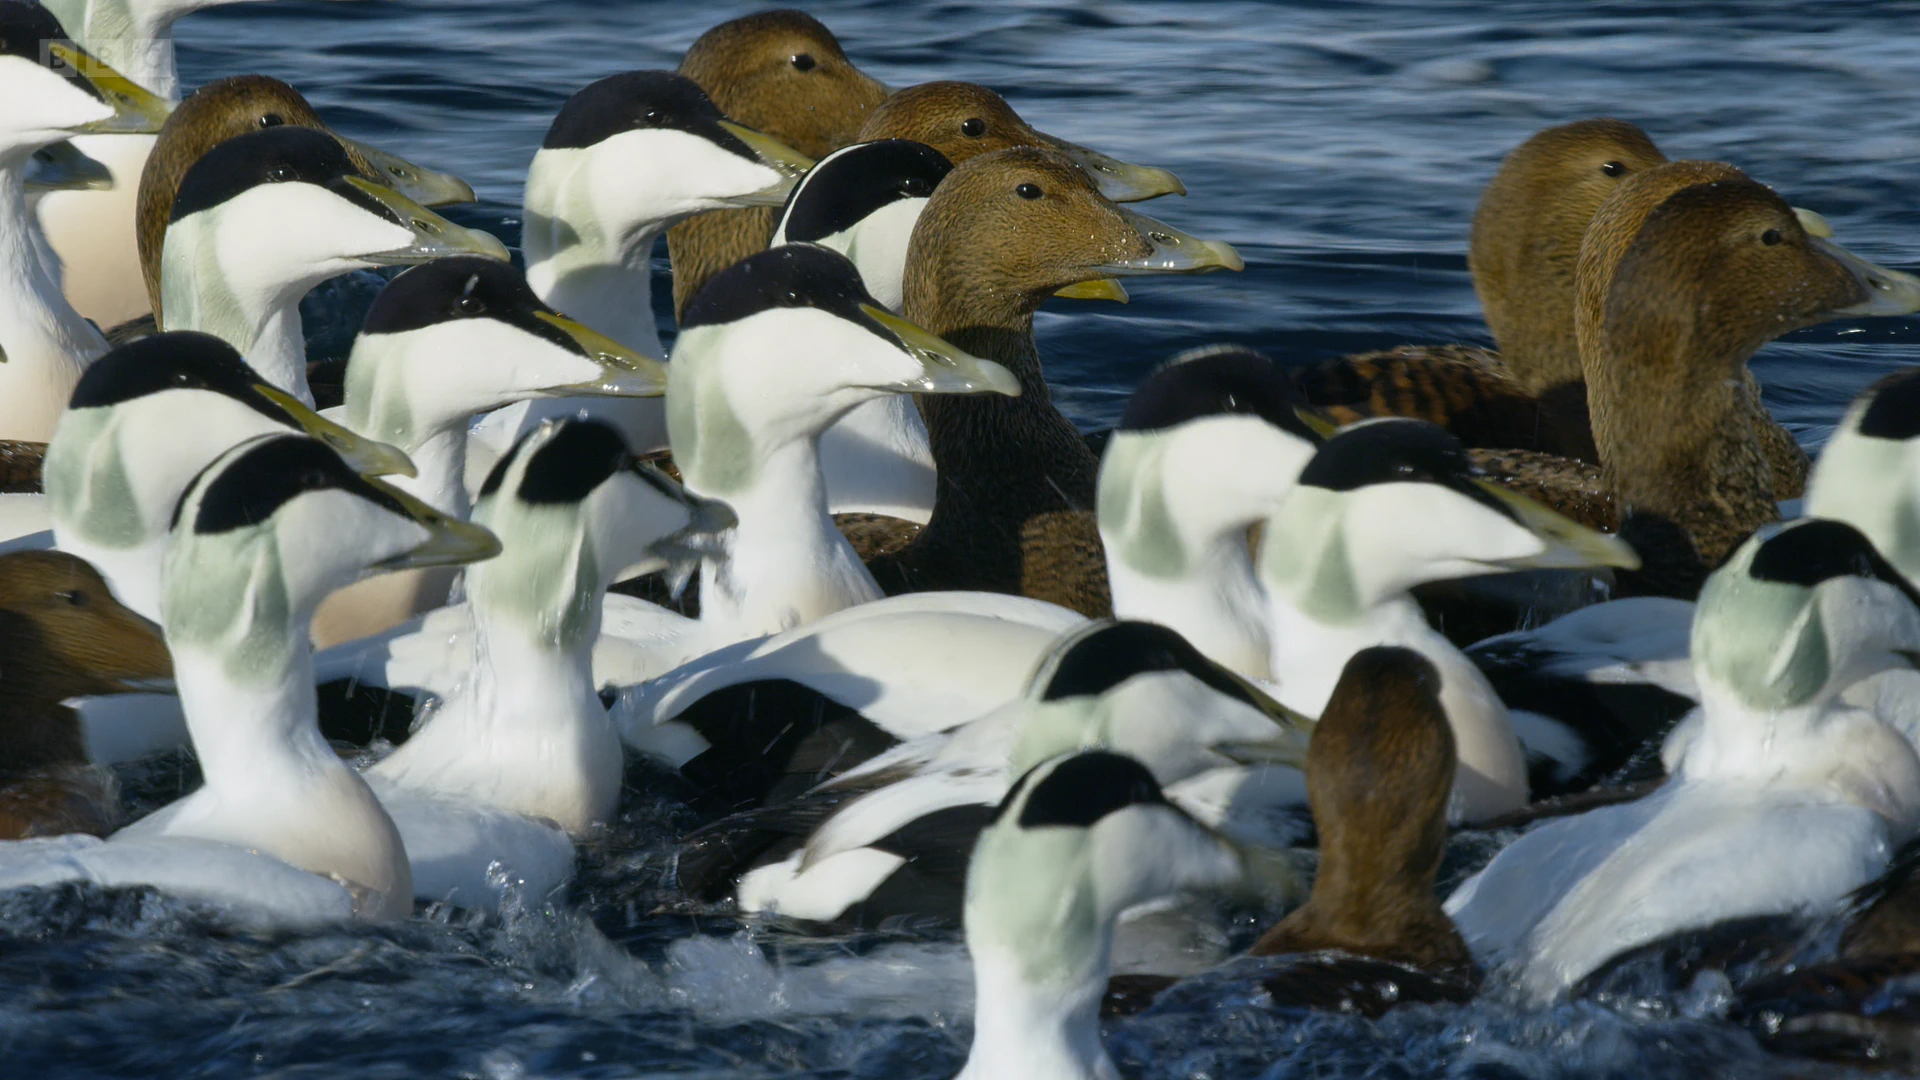 Common eider (Somateria mollissima) as shown in A Perfect Planet - Oceans